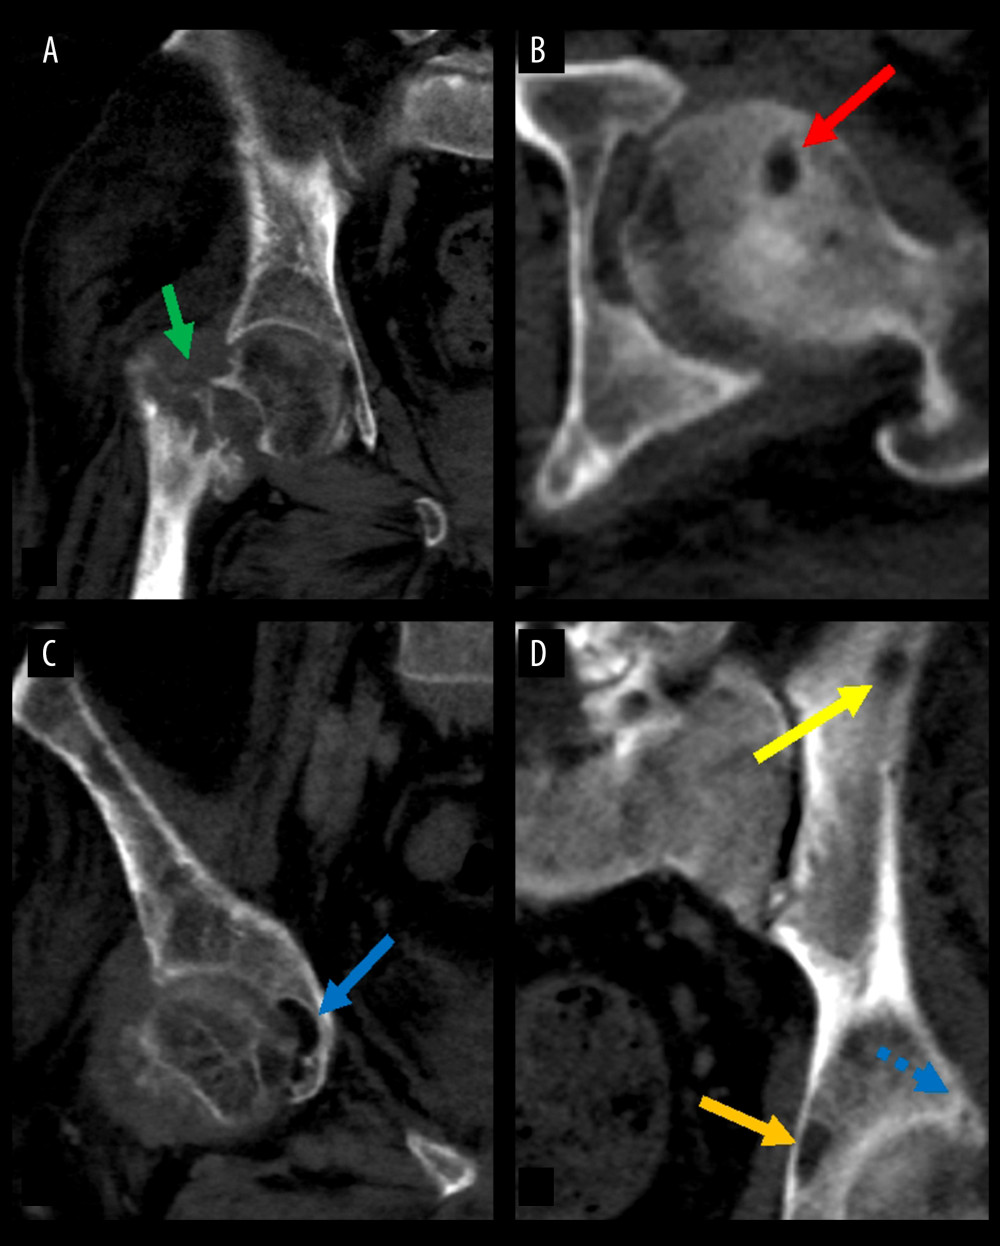 Radiologic findings of multiple osteolytic lesions on CT-imaging. (A) A coronal view of a subacute-to-chronic-appearing, displaced, angulated, pathologic fracture with associated ill-defined lytic lesions (solid green arrow); (B) An axial view of a lucent lesion centered at the left femoral head (solid red arrow); (C) A coronal view of a similar lytic lesion at the anterior right acetabulum (solid blue arrow); (D) A coronal view of a similar lucent lesion in the left iliac bone (solid yellow arrow), in the left acetabulum (solid orange arrow) and left posterior acetabular bone (dotted blue arrow).